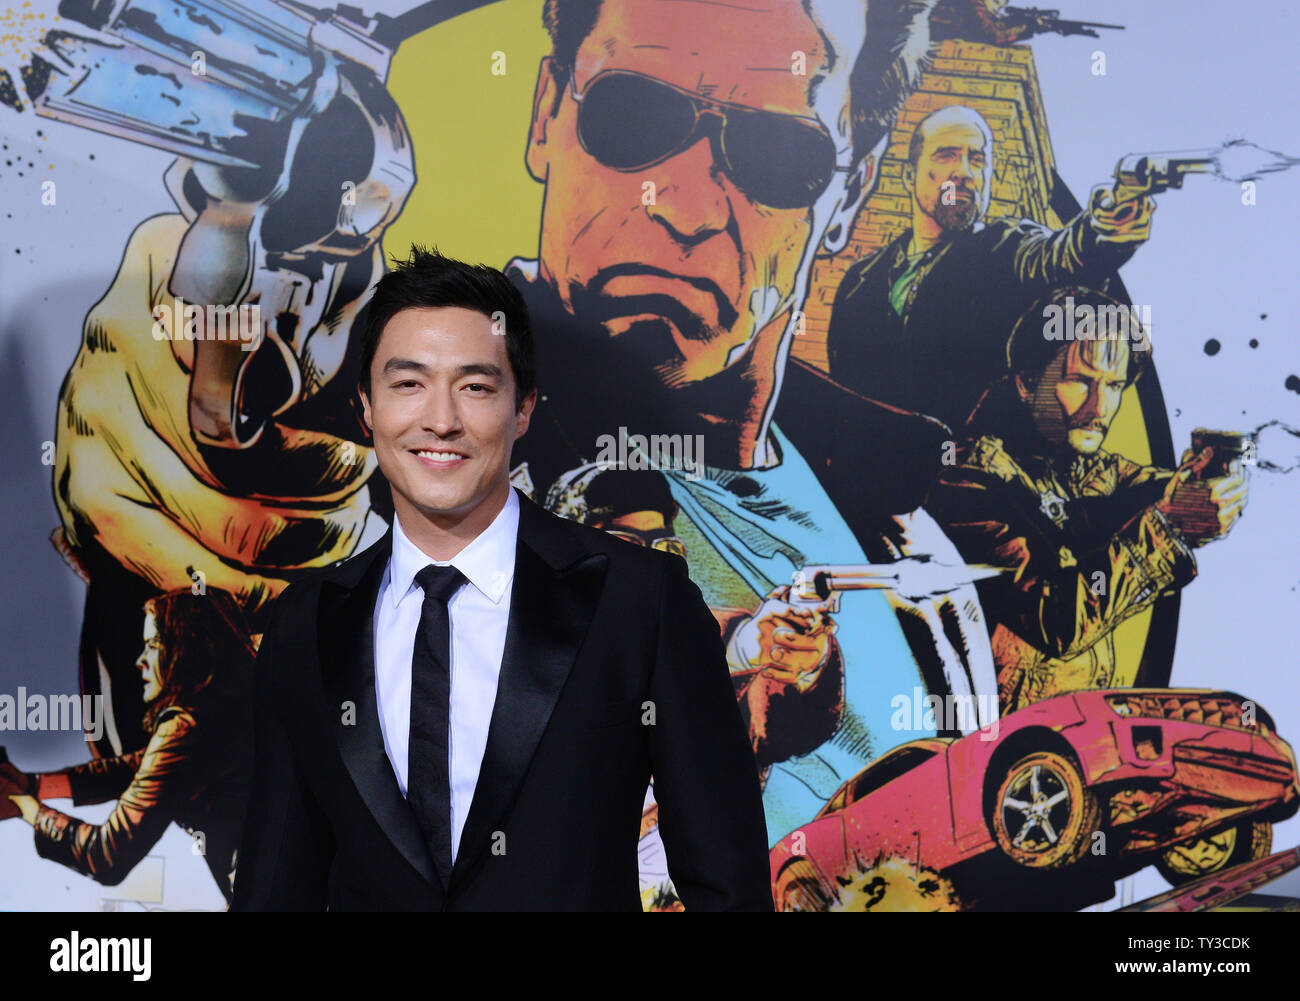 Daniel Henney, a cast member in the motion picture crime thriller 'The Last Stand' attends the premiere of the film at Grauman's Chinese Theatre in the Hollywood section of Los Angeles on January 14, 2013.  UPI/Jim Ruymen Stock Photo